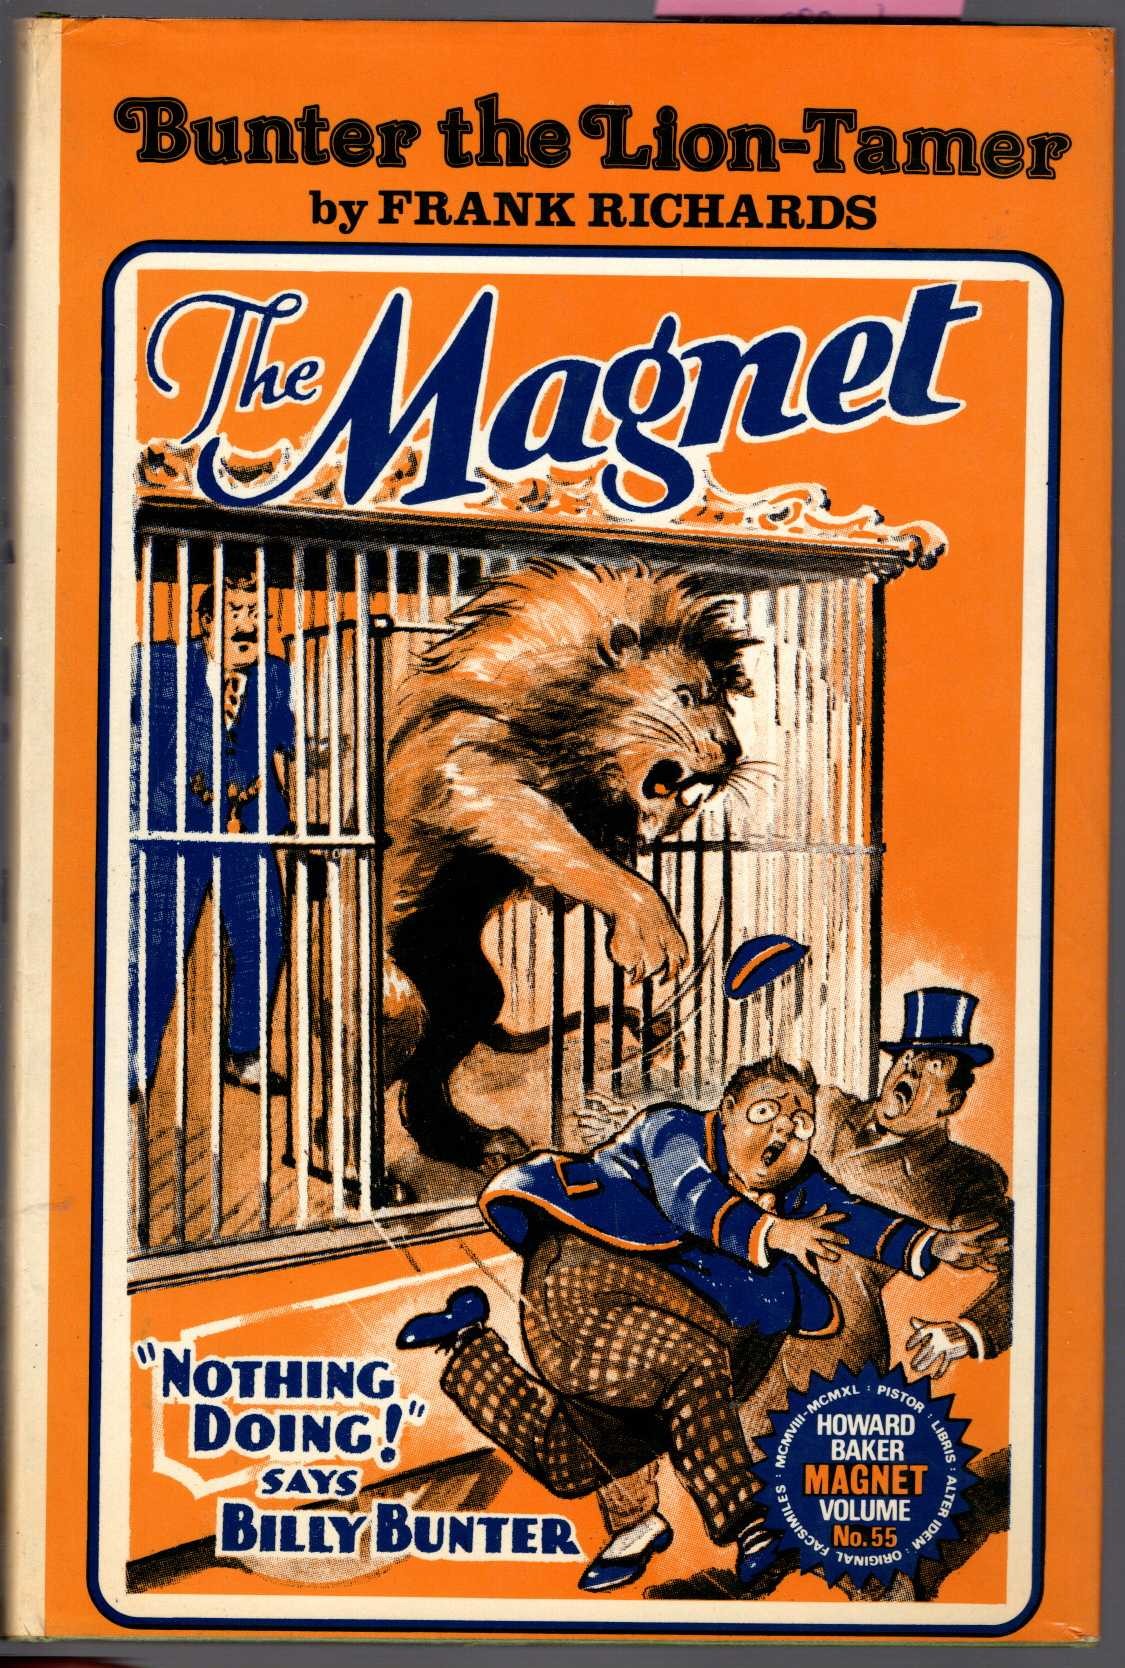 BUNTER THE LION-TAMER front book cover image